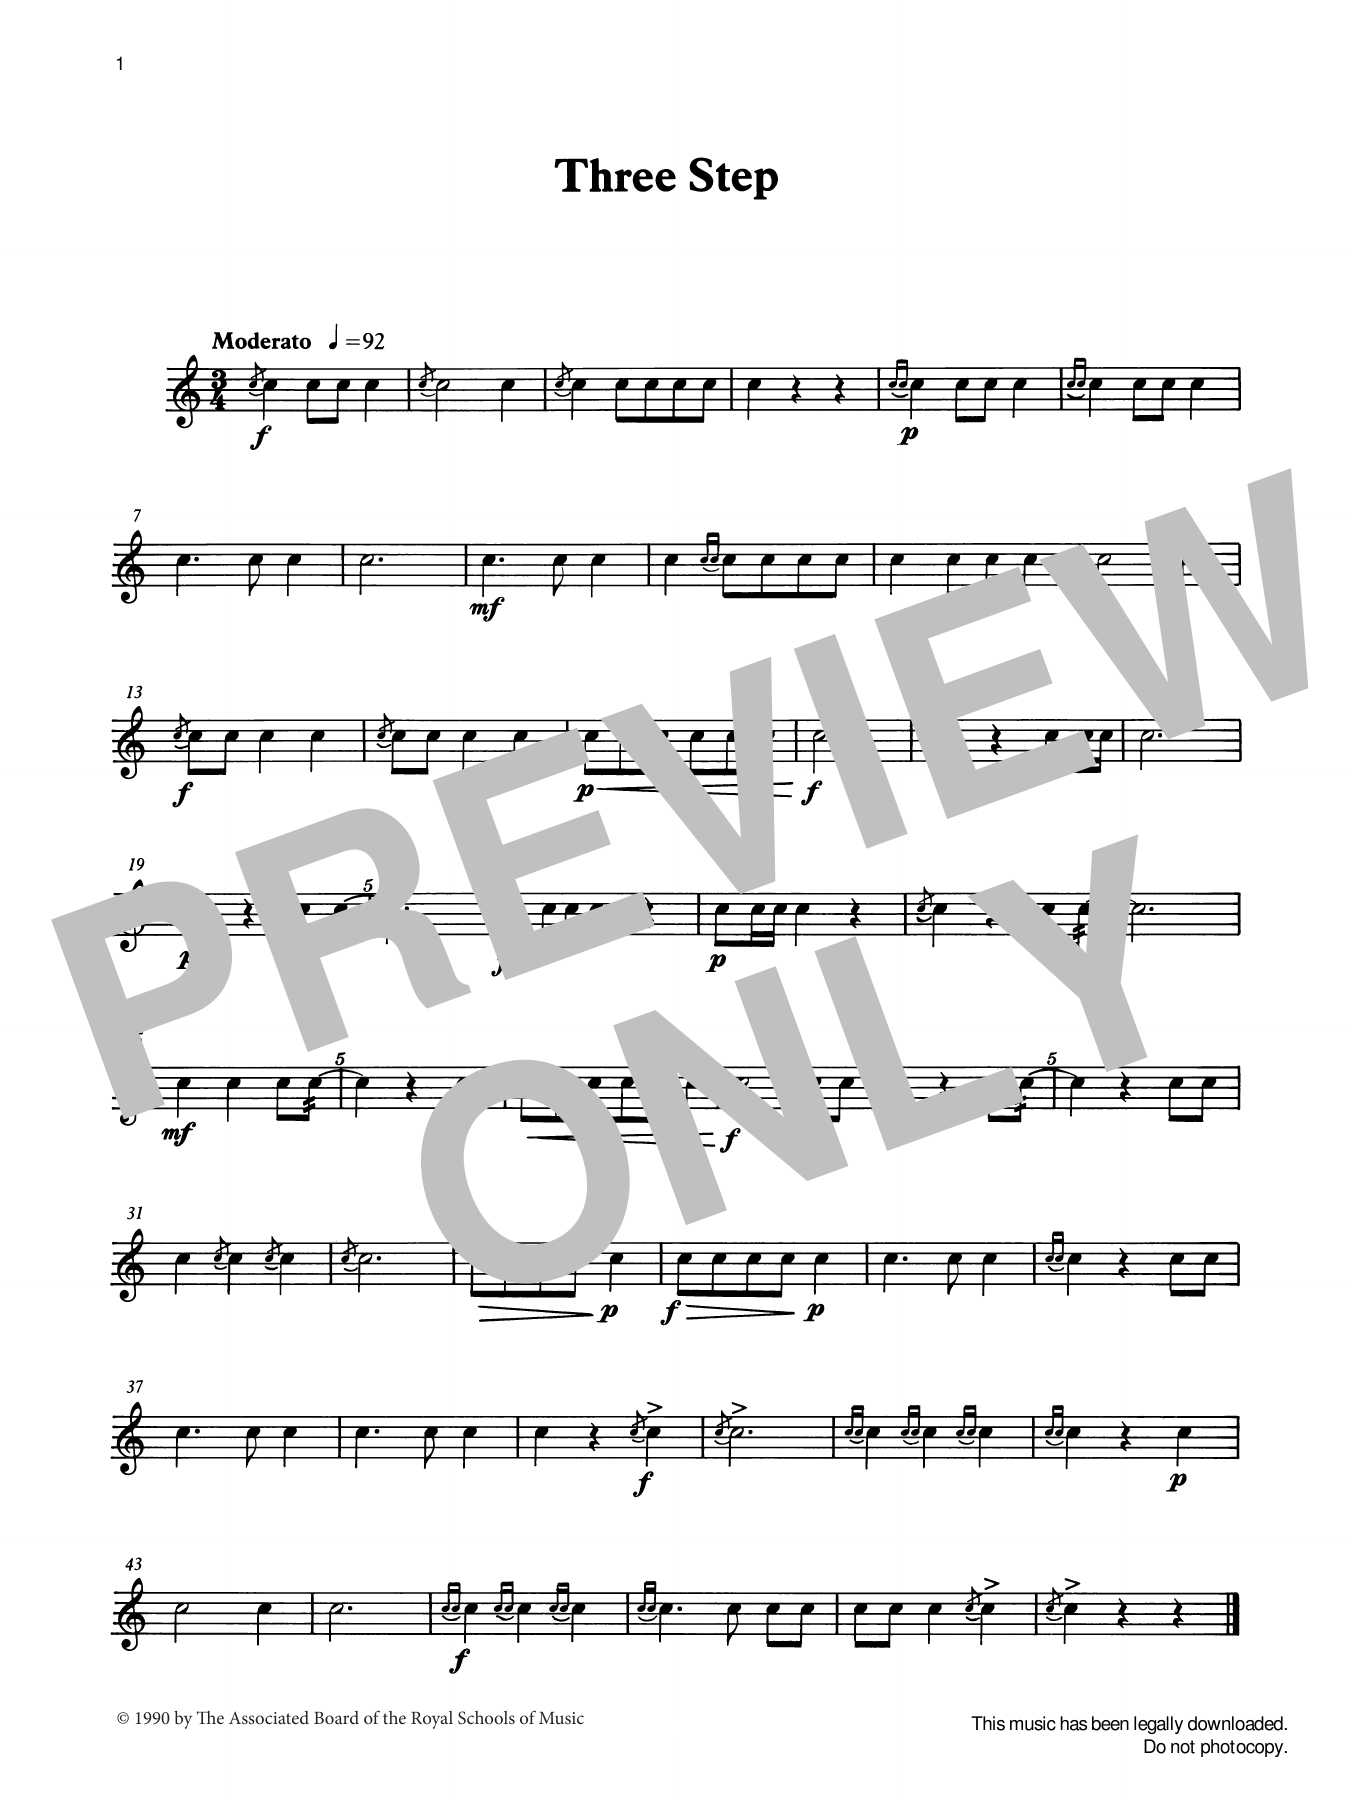 Download Ian Wright and Kevin Hathaway Three Step from Graded Music for Snare Sheet Music